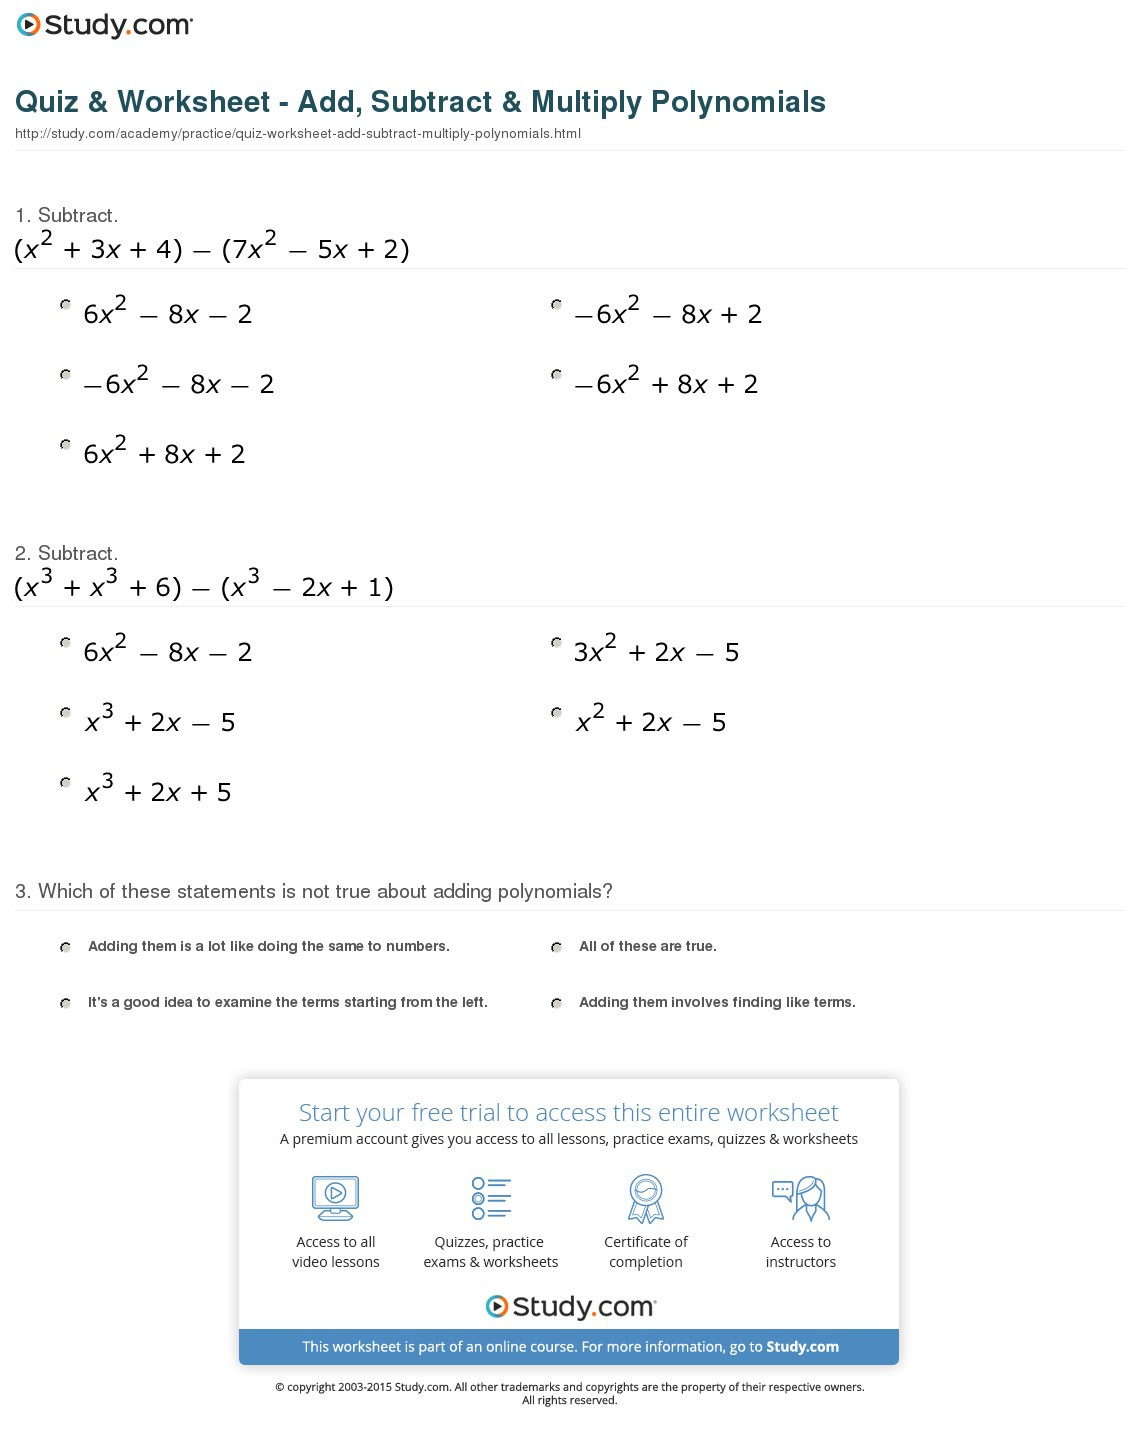 Quiz  Worksheet  Add Subtract  Multiply Polynomials  Study